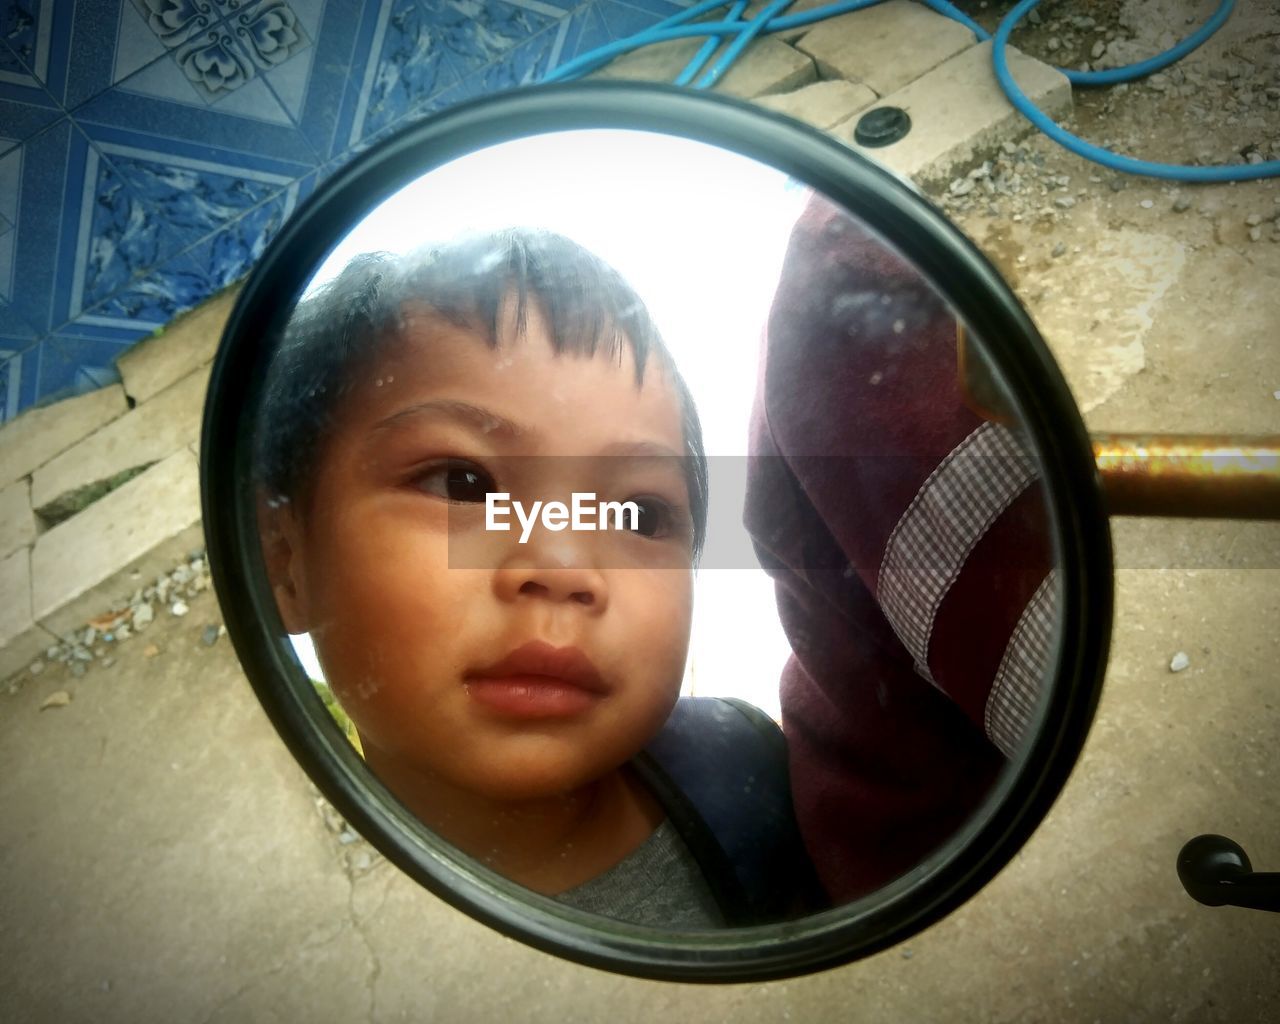 childhood, child, one person, portrait, baby, toddler, men, headshot, mirror, innocence, looking, looking at camera, person, blue, cute, indoors, snapshot, window, curiosity, human face, front view, emotion, light, circle, close-up, lifestyles, reflection, shape, smiling, geometric shape